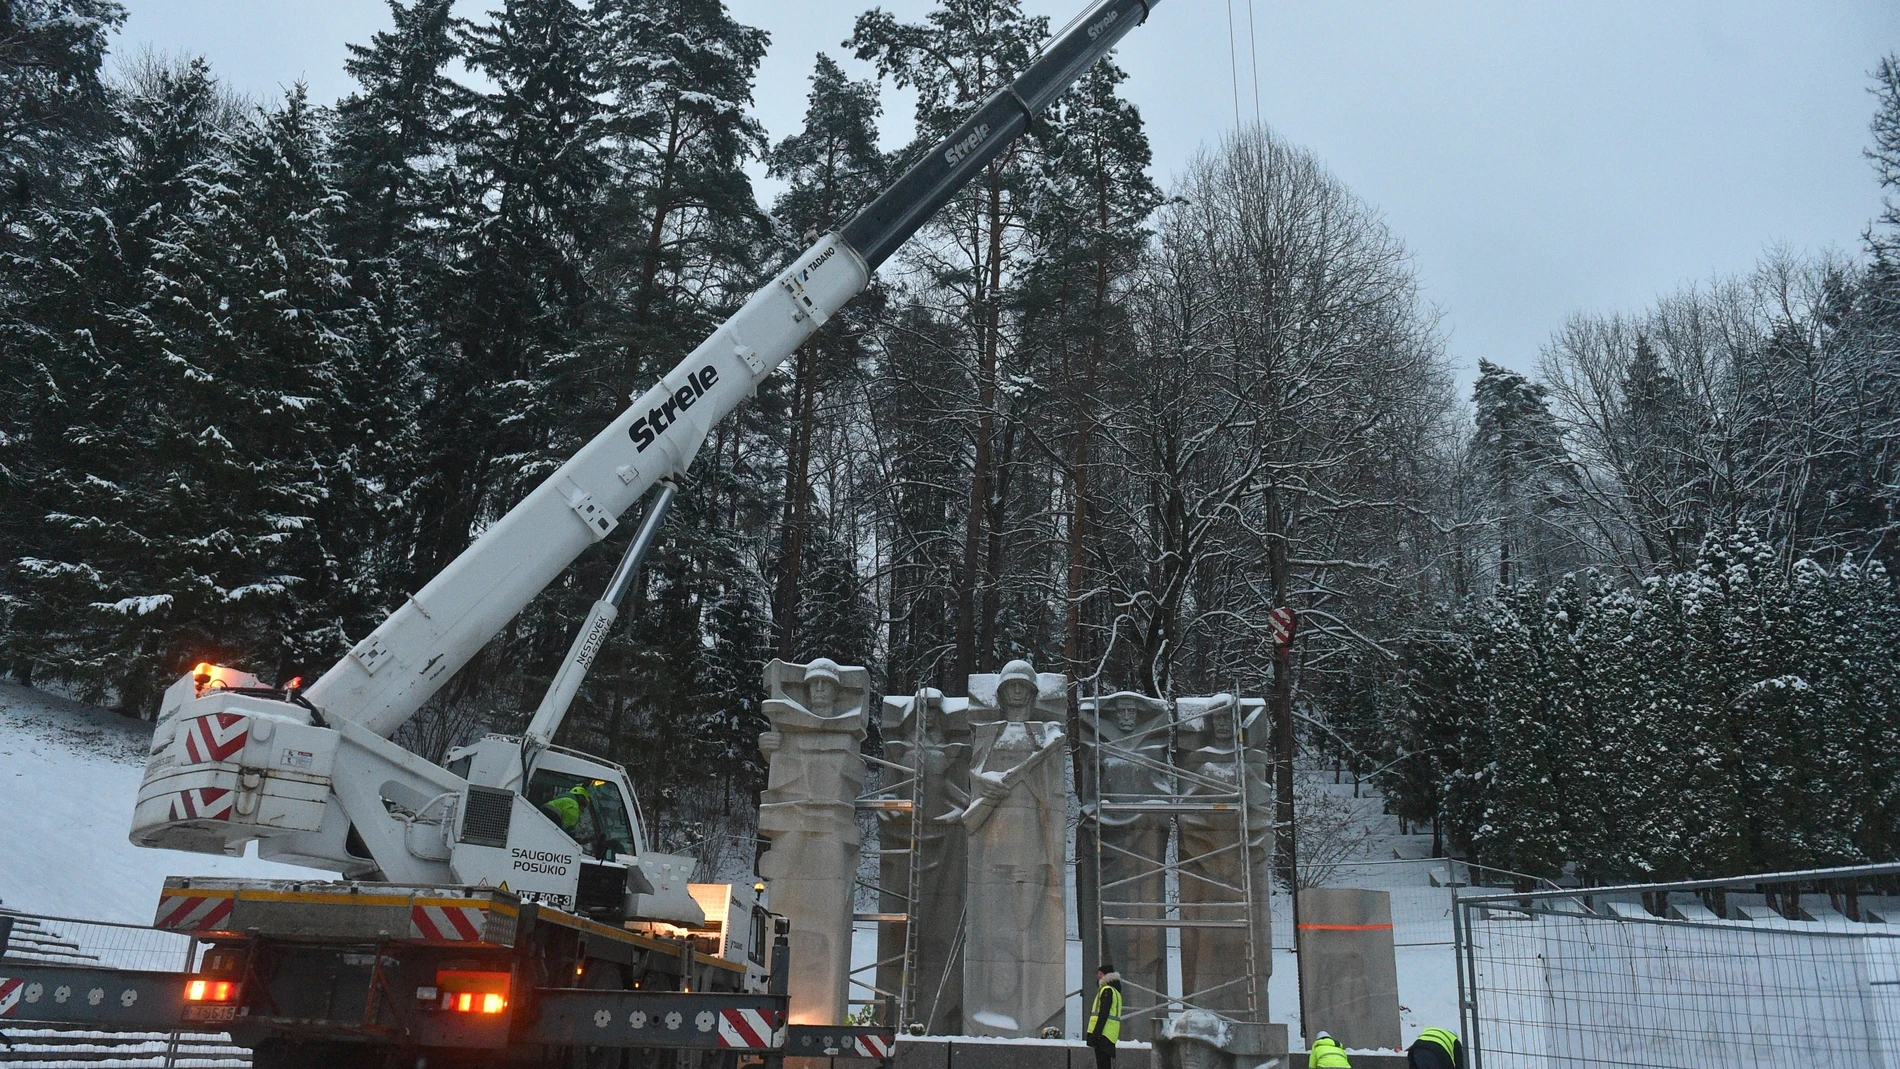 FILE - Municipal workers dismantle the memorial of the Red Army Soldiers who died during the liberation of Vilnius from Nazi invaders during WWII at the Antakalnis Memorial Cemetery in Vilnius, Lithuania, Wednesday, Dec. 7, 2022. Estonia and other NATO members - Latvia and Lithuania - have sought to remove the monuments widely seen as a legacy of Soviet occupation of the countries. Moscow has denounced those moves as a desecration of memory of Soviet soldiers who fell while fighting the Nazis...